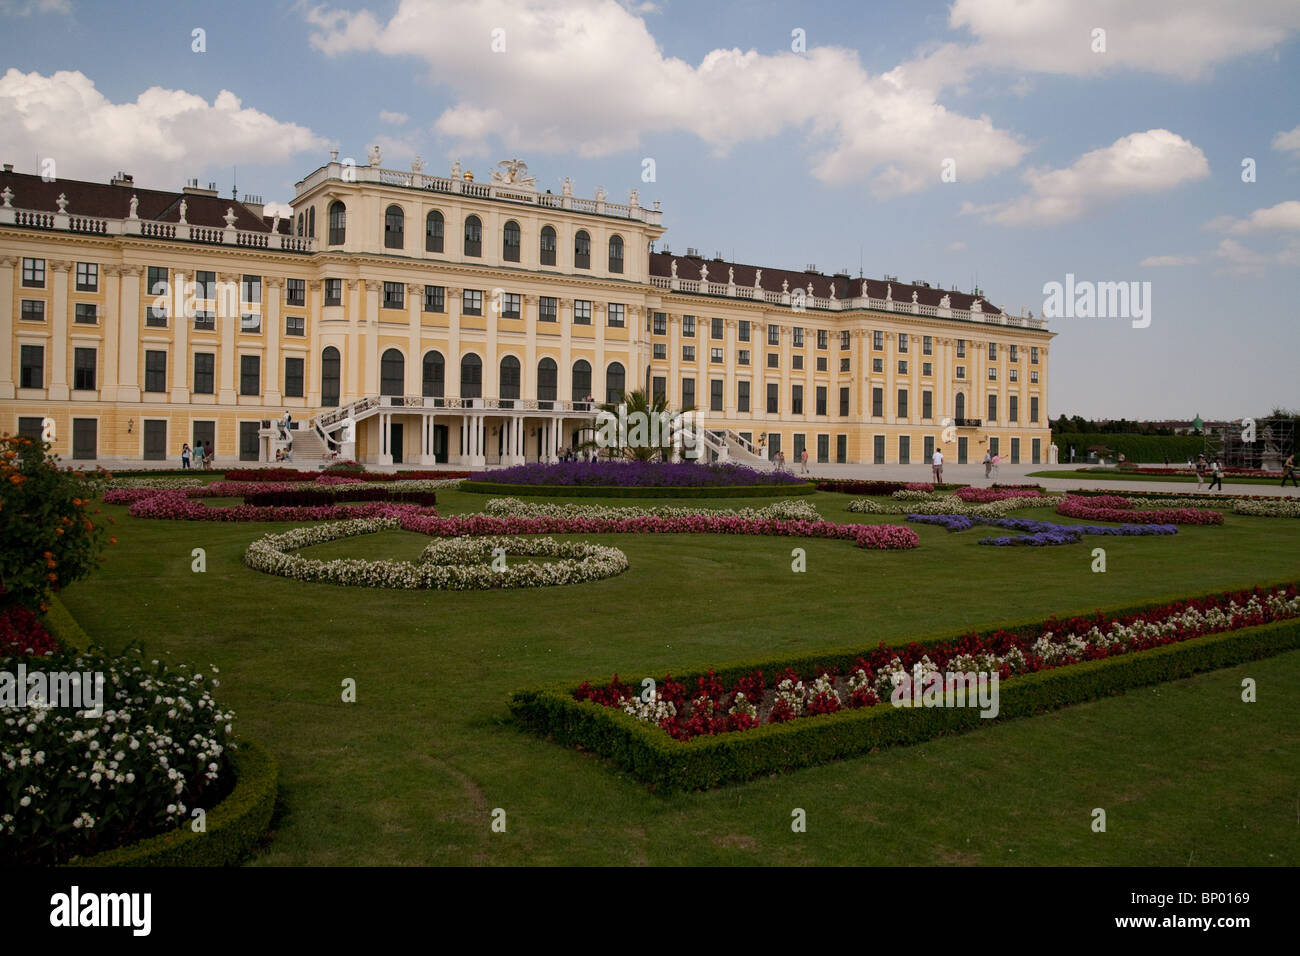 Rear of Schoenbrunn Palace and Gardens Stock Photo